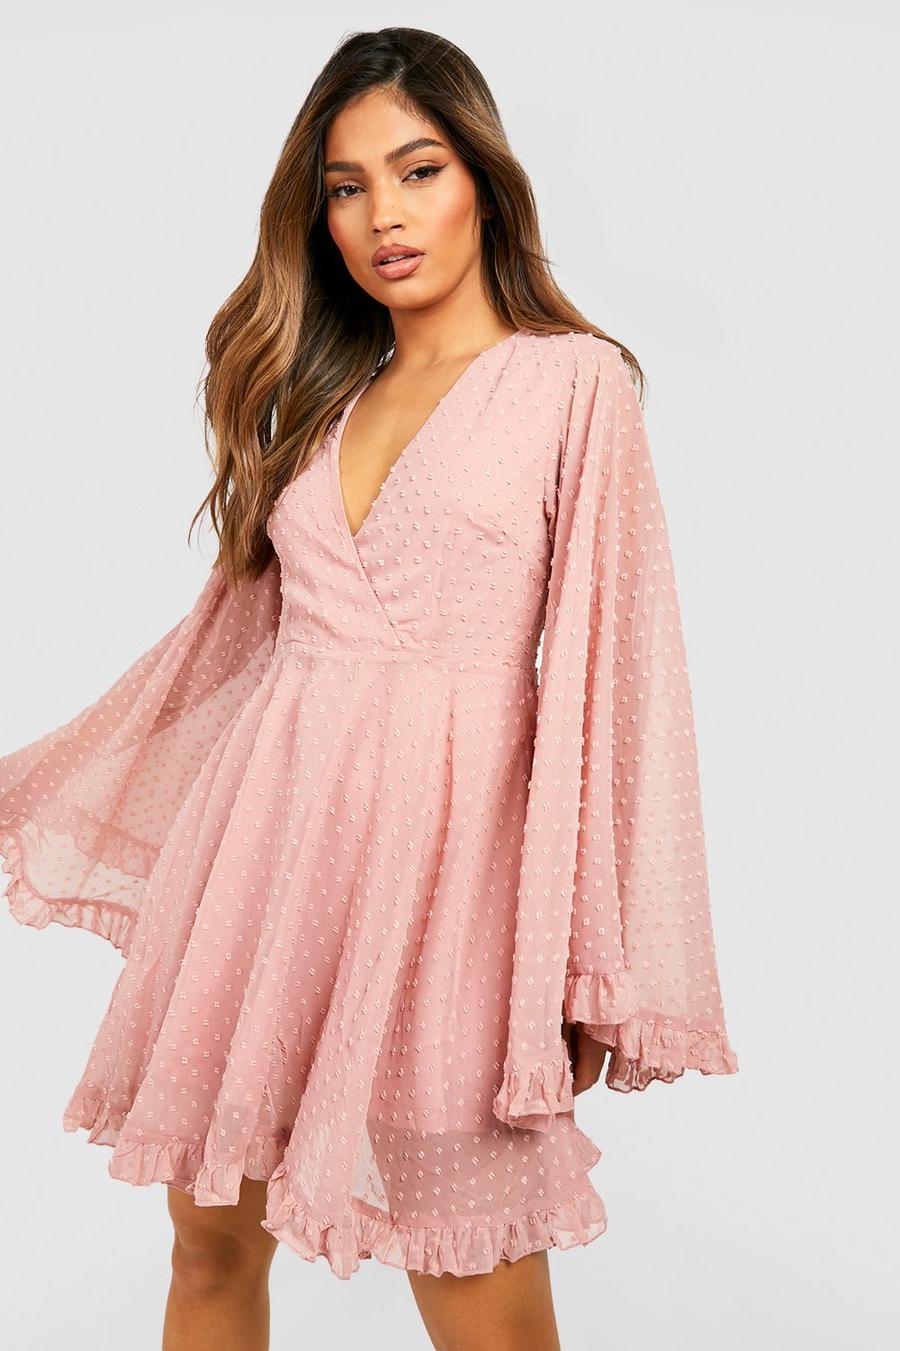 Robe patineuse à manches flare, Blush pink